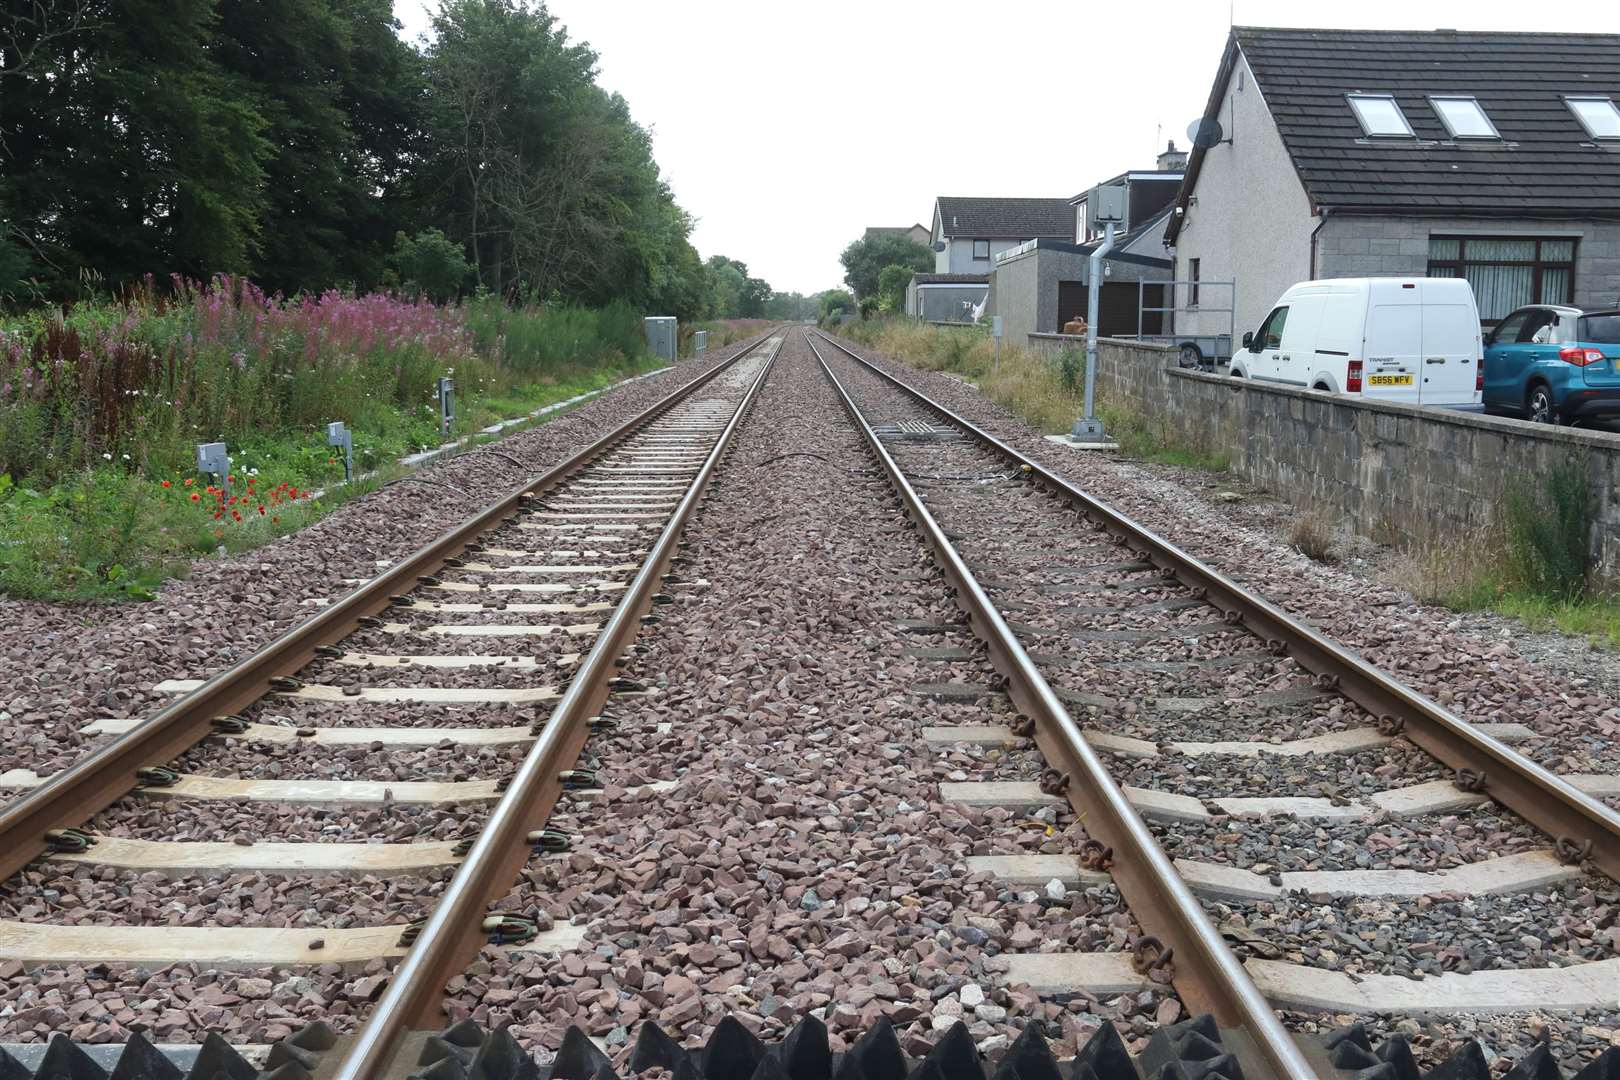 Police have highlighted the danger of the railway track after incidents in and around Inverurie.